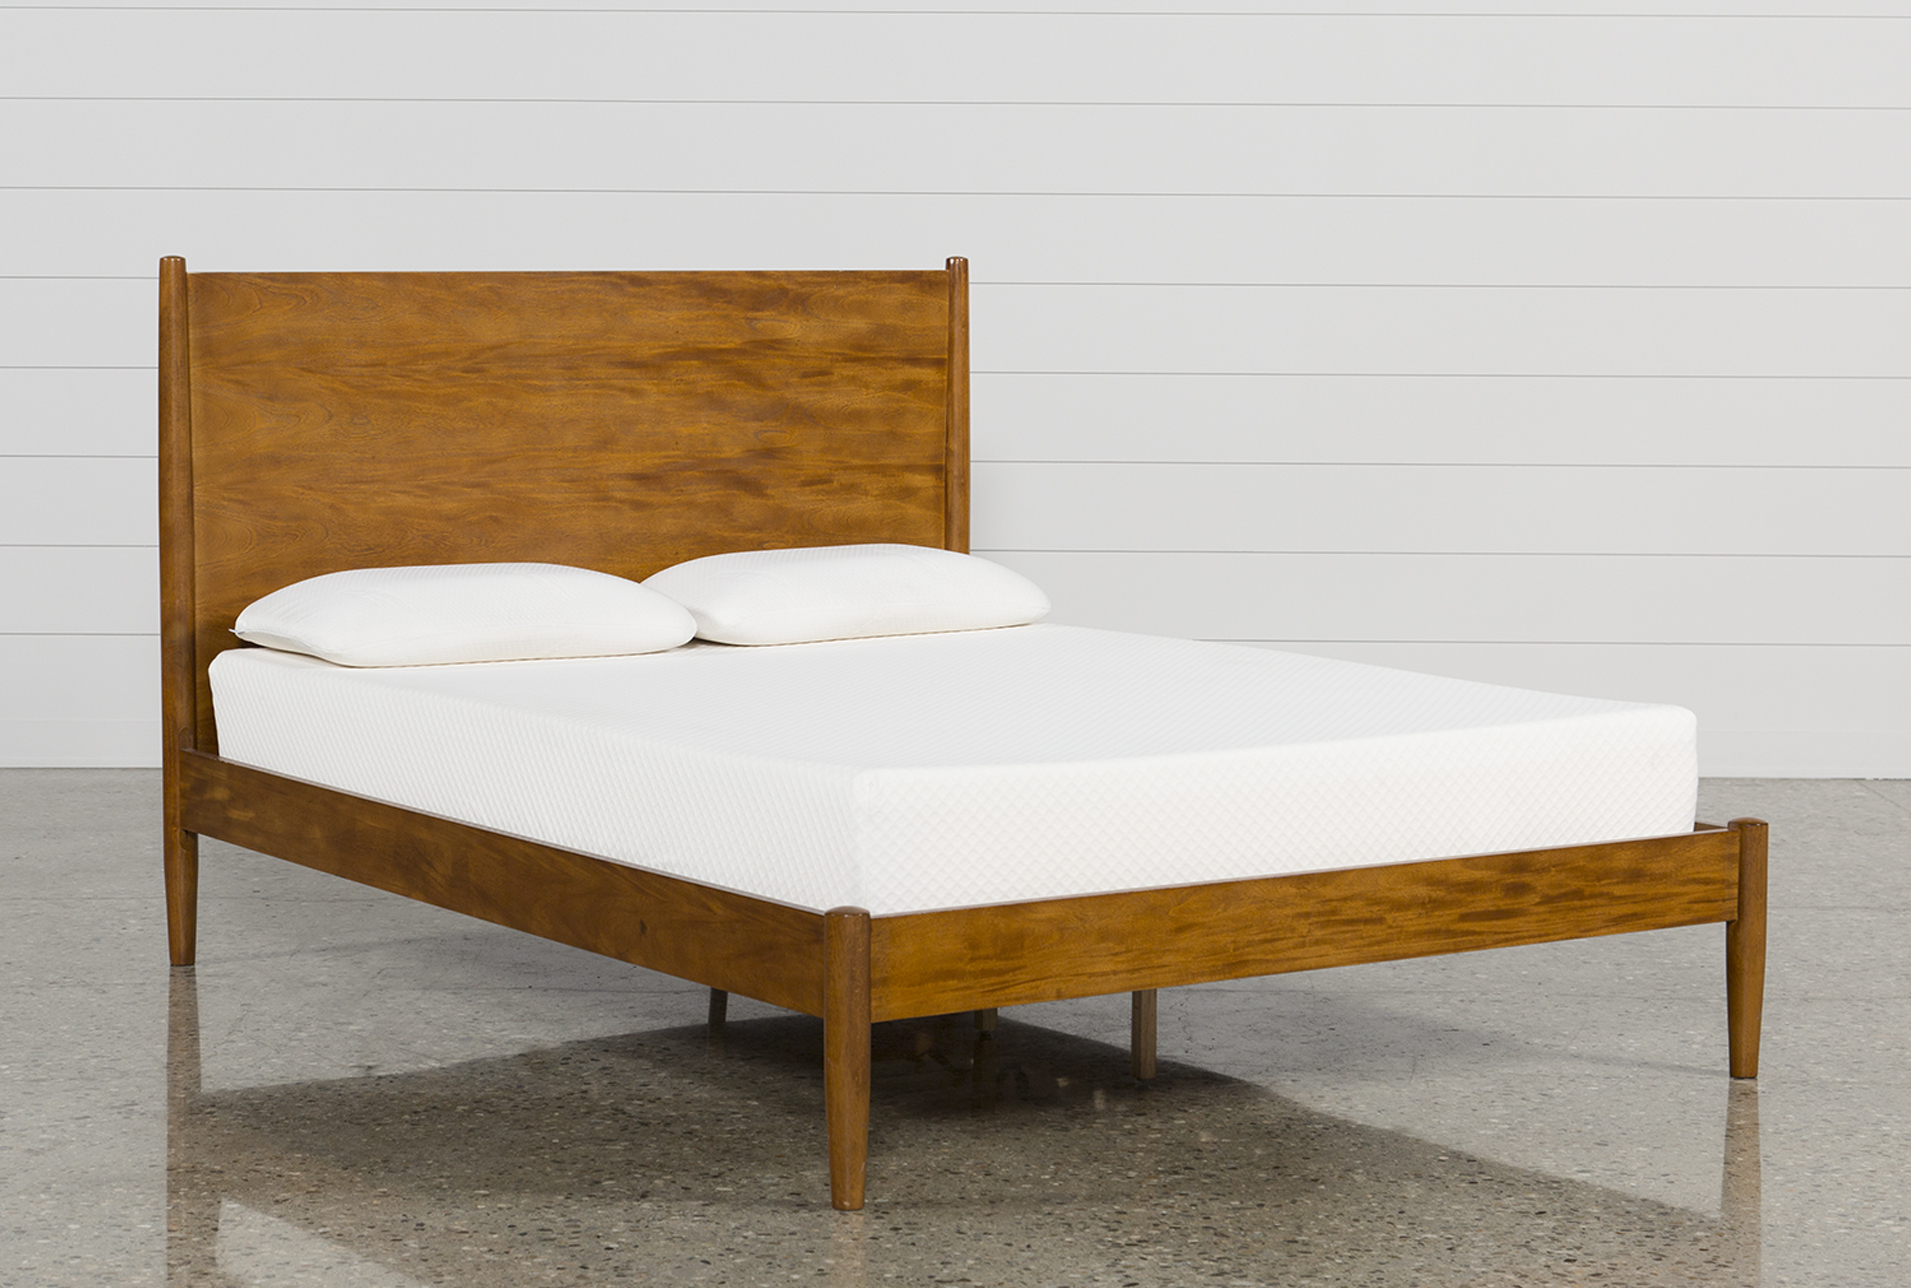 Alton Cherry Queen Platform Bed (Count: 1) has been successfully added to JZDETTM